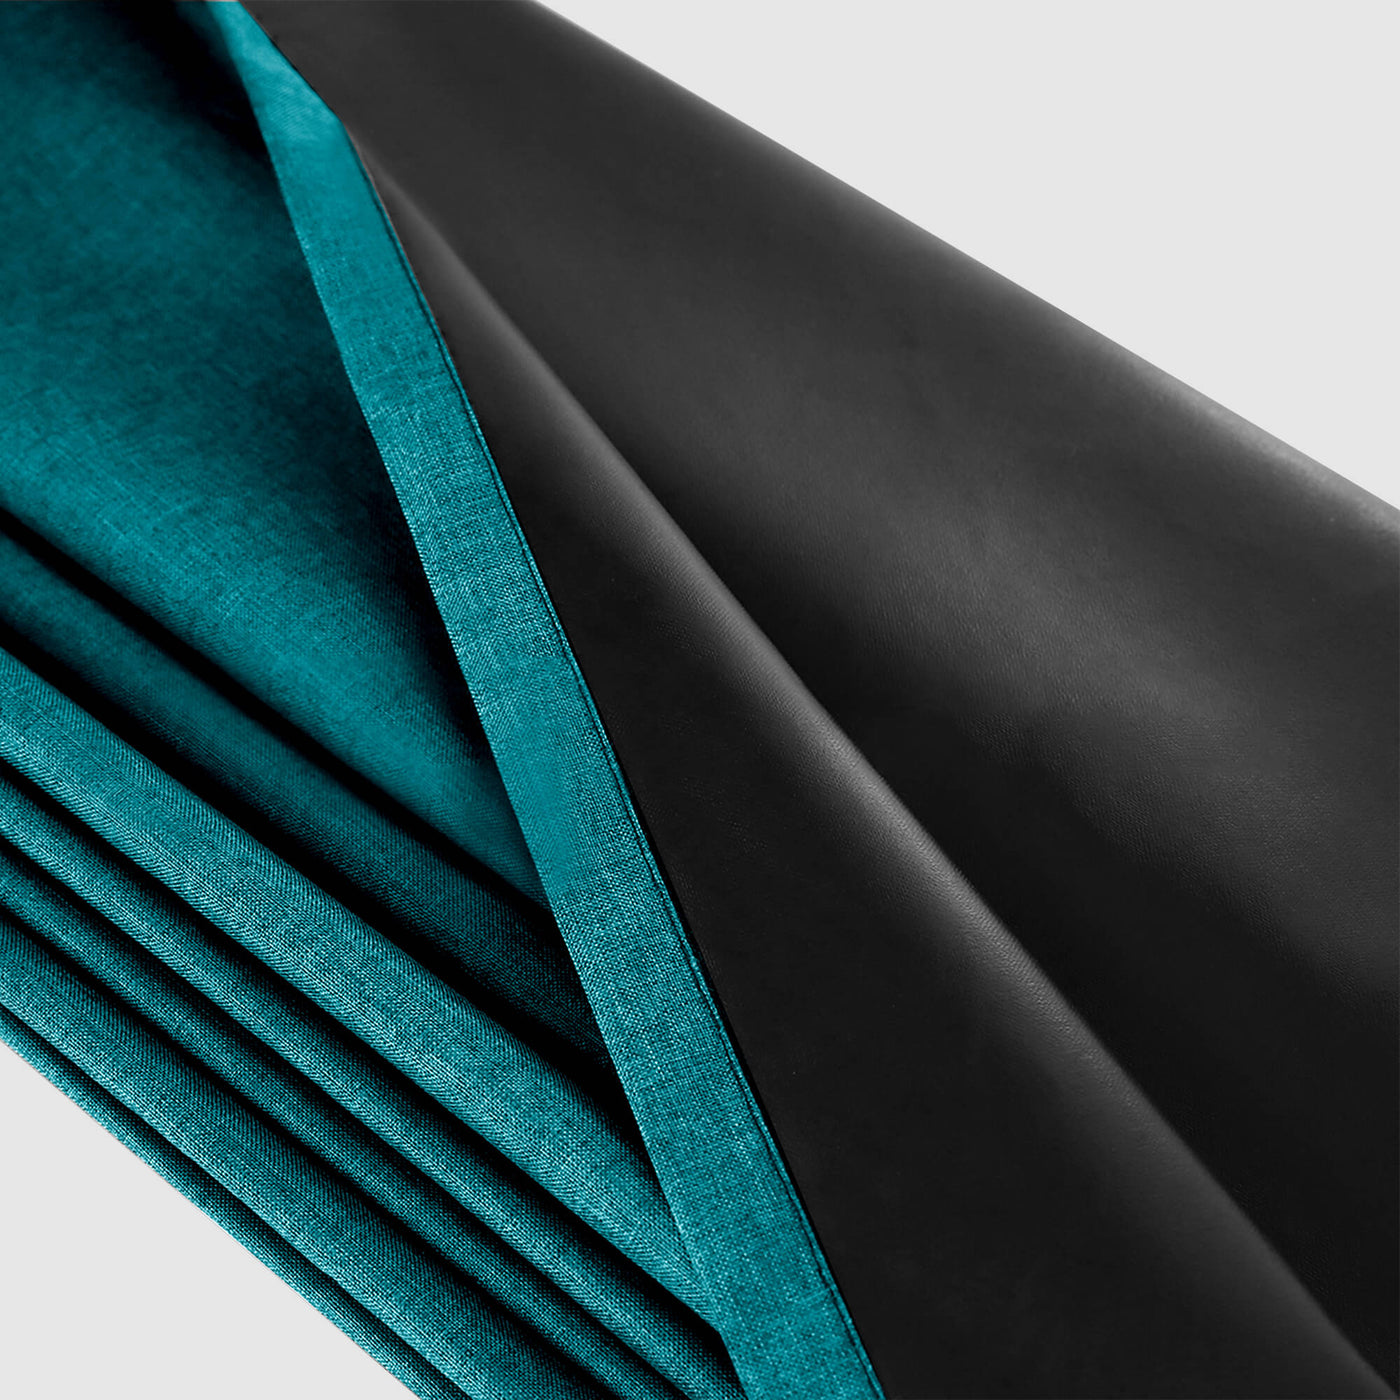 Heartcosy Blackout Curtains Cyan - Grommet Top & Bottom